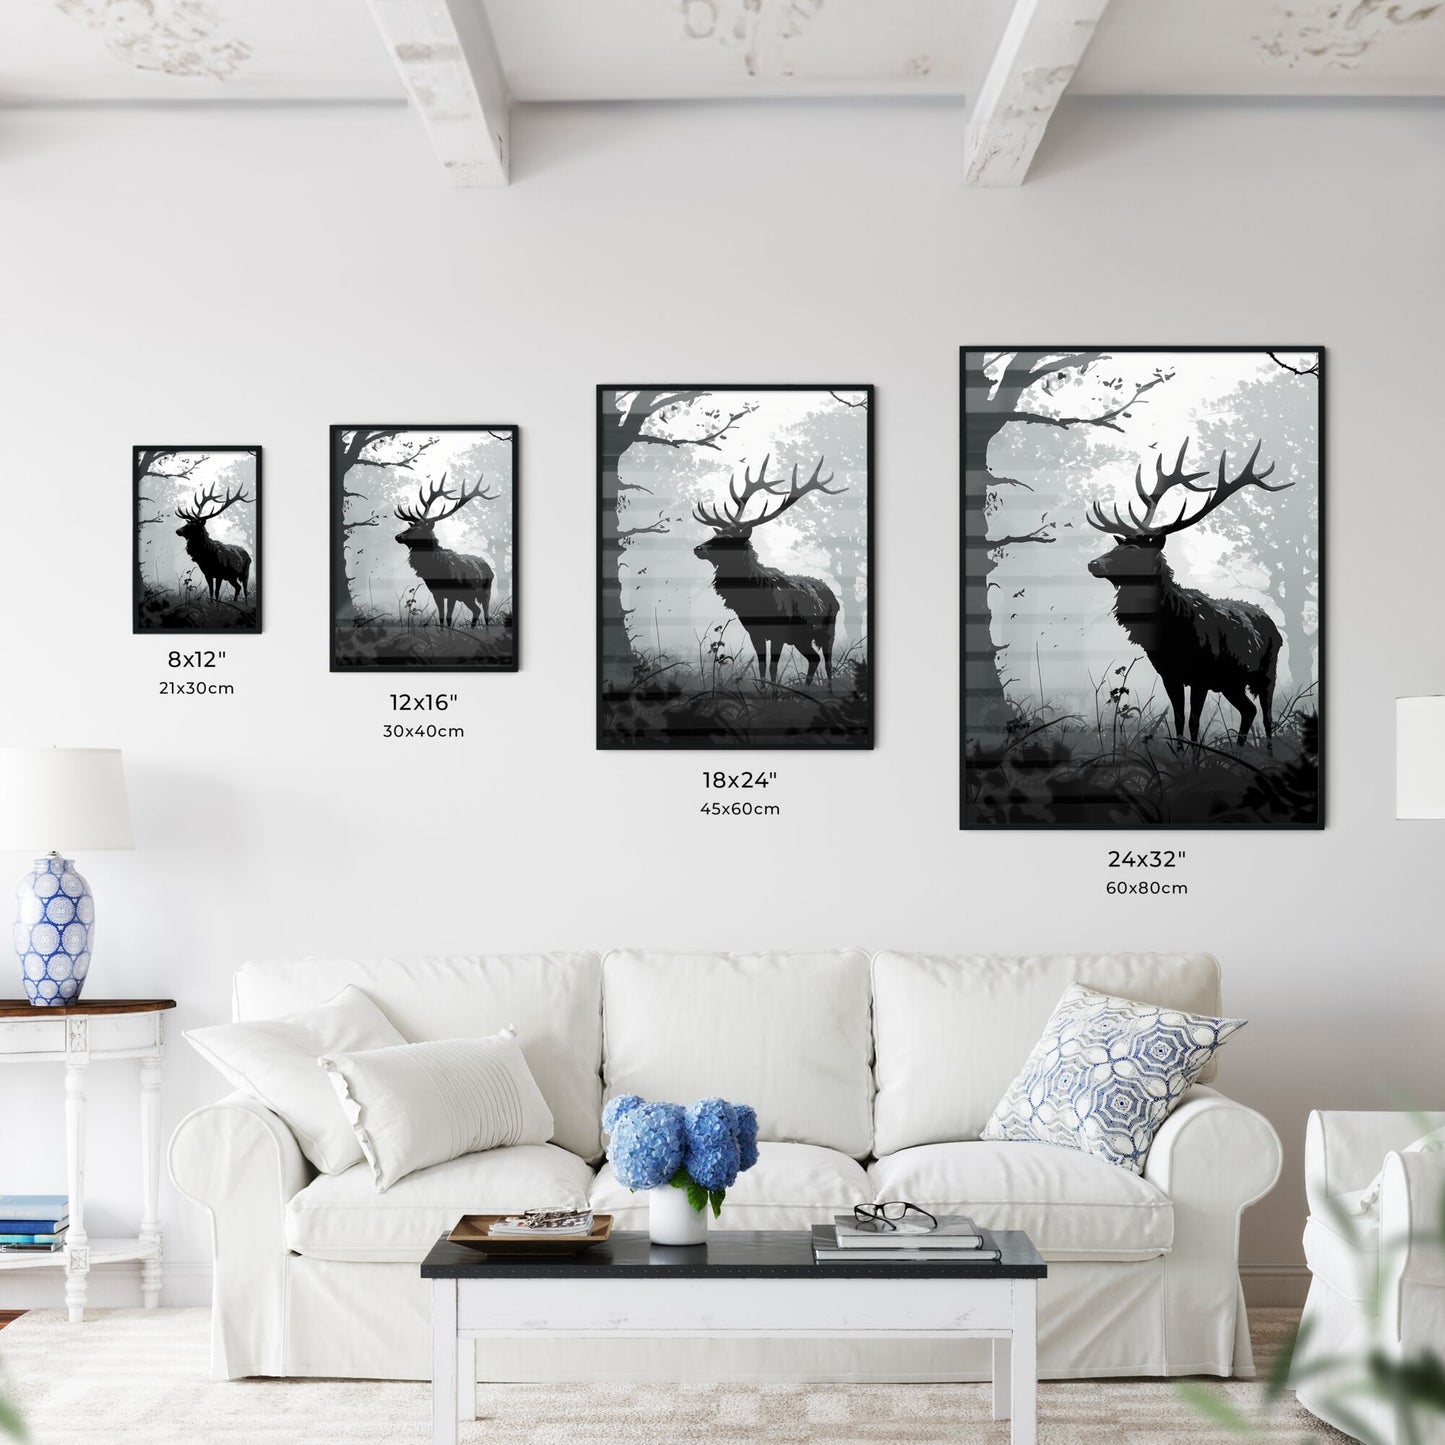 A Poster of deer in the woods - A Black And White Image Of A Deer In The Woods Default Title